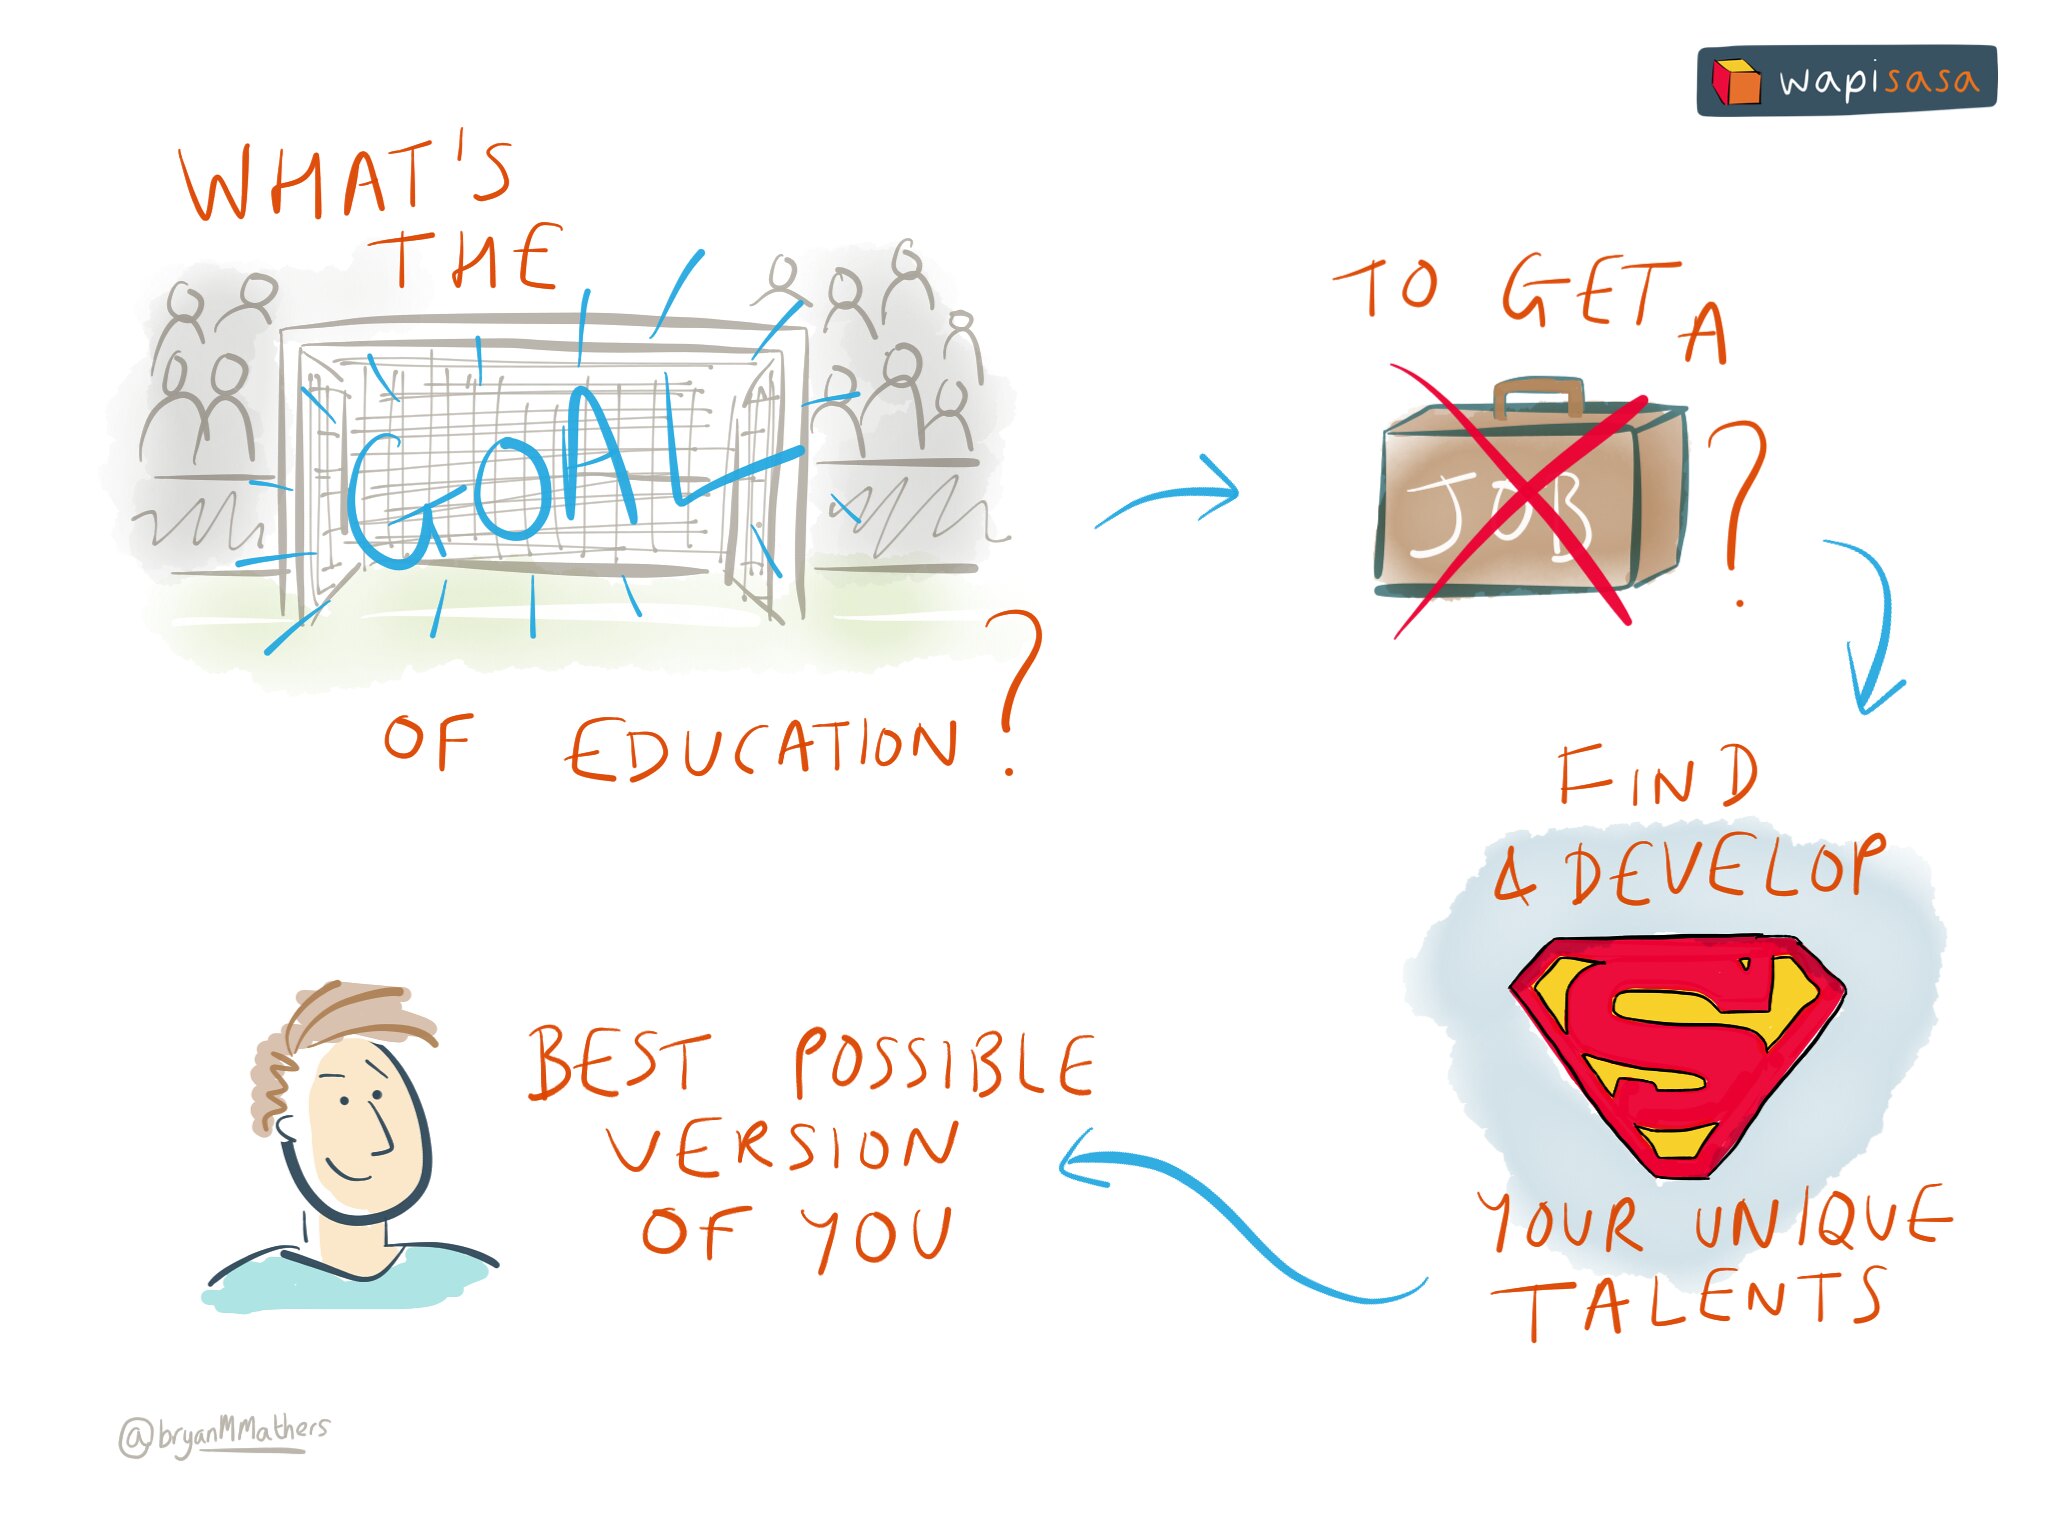 Your education is a crucial part of your story and who you are. The purpose of your education is not just to get you a job but to also explore, find and develop your talents. What are your unique talents? How are you developing them as part of your broader education to become the best possible a better version of yourself? Goal of Education sketch by Visual Thinkery is licensed under CC-BY-ND